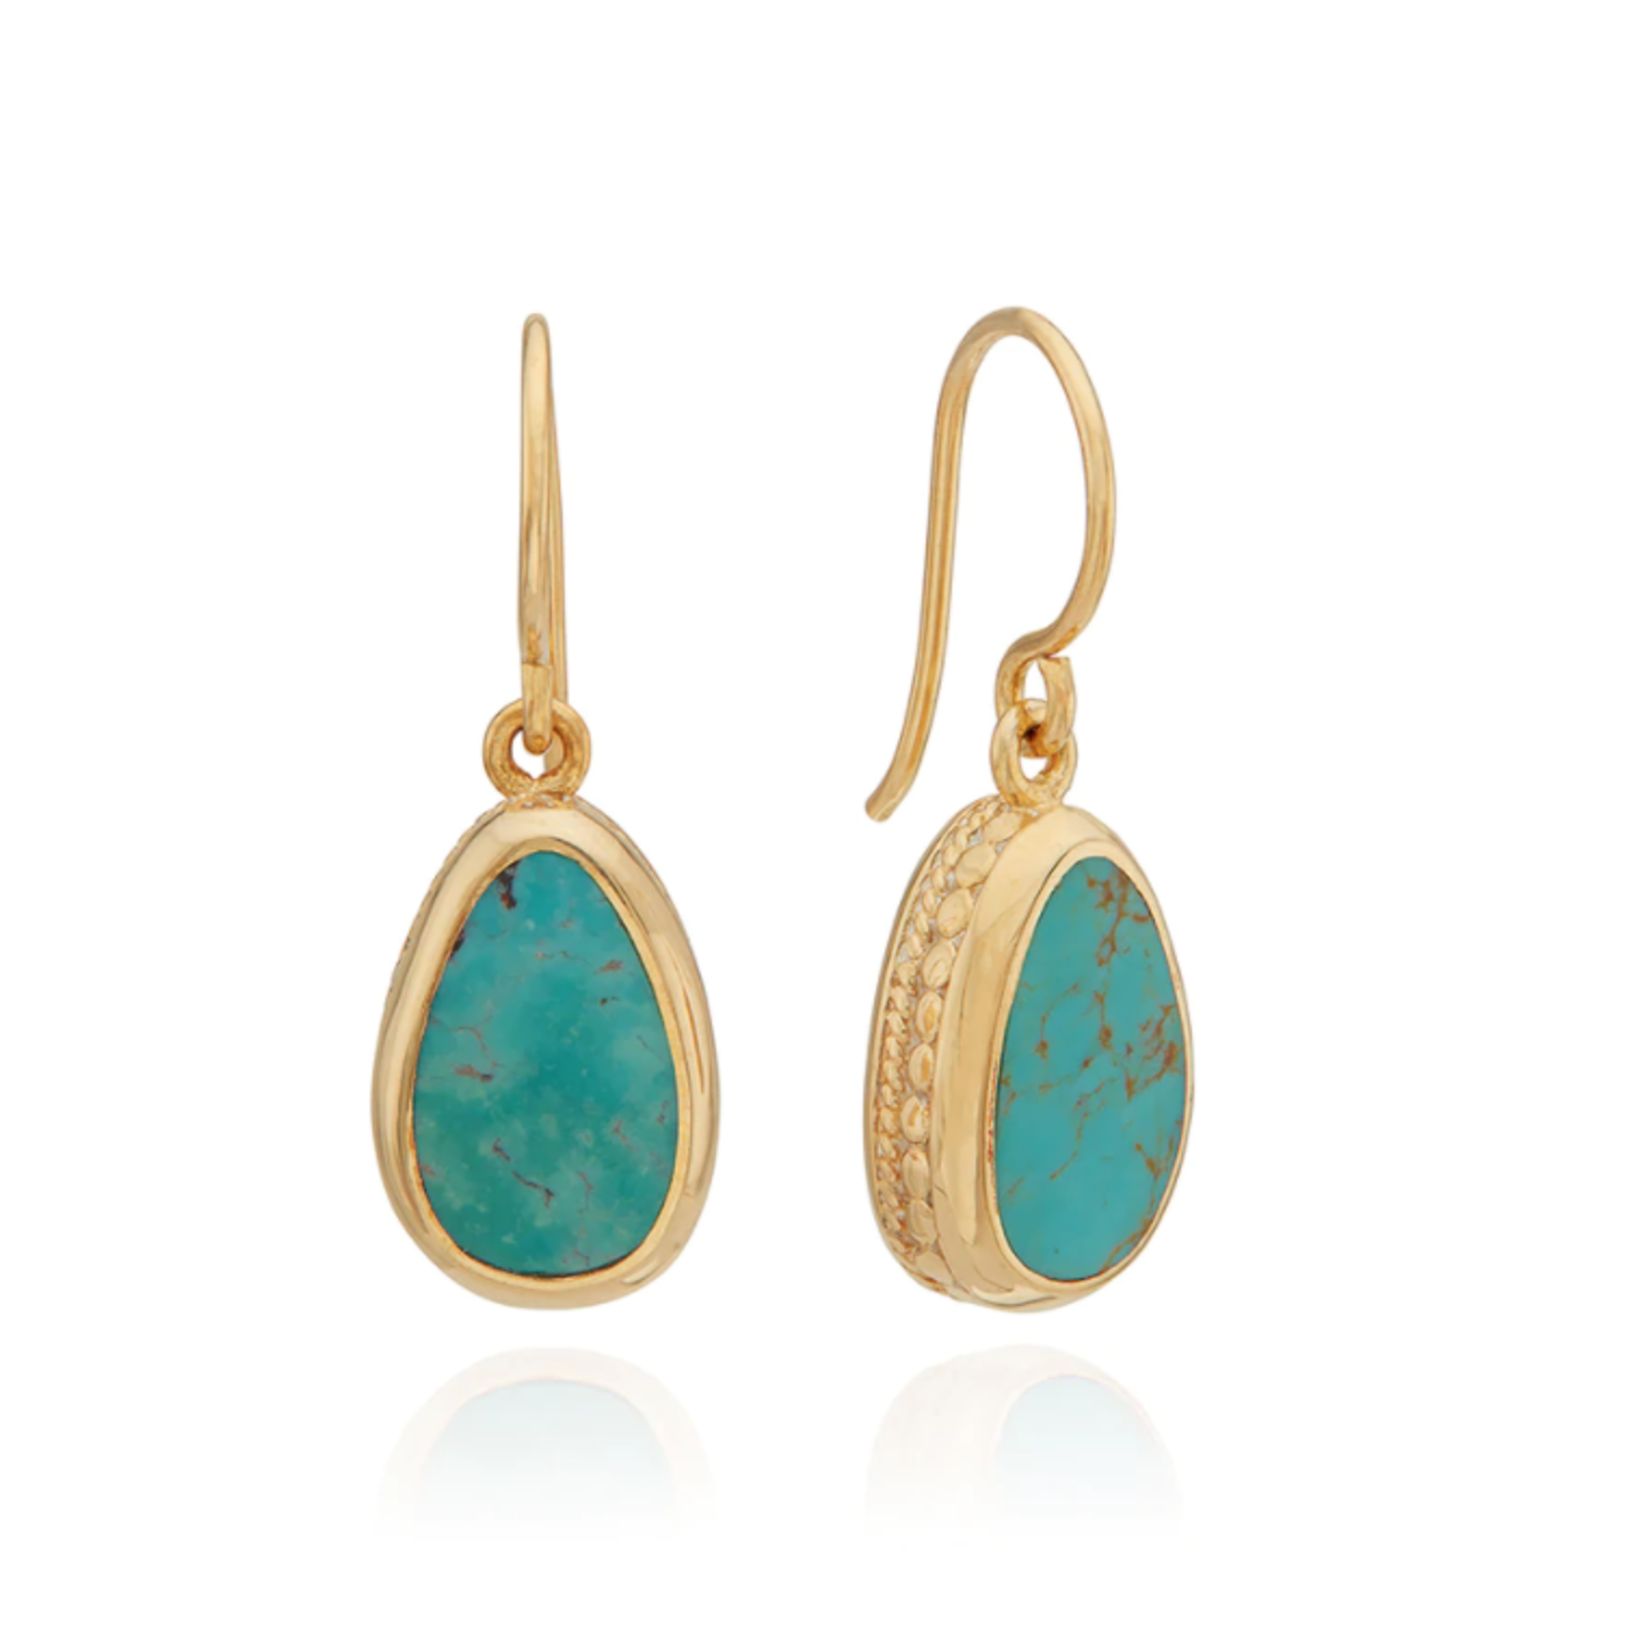 Turquoise Assymetrical Drop Earrings - 18k Gold Plate